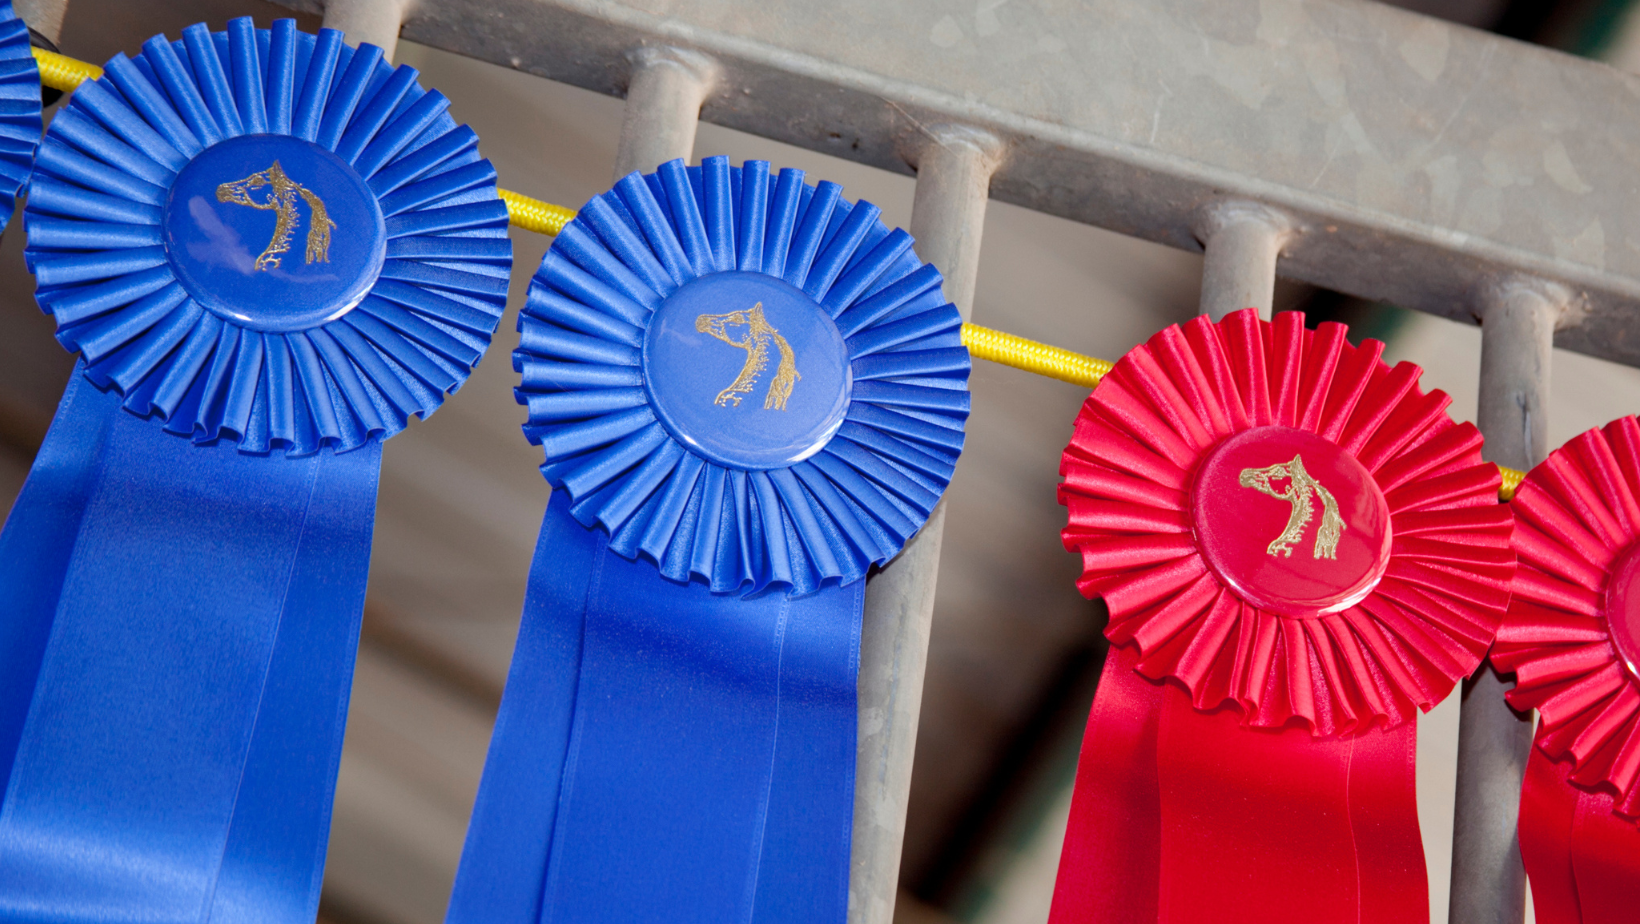 Horse Show Ribbons: What do they mean?